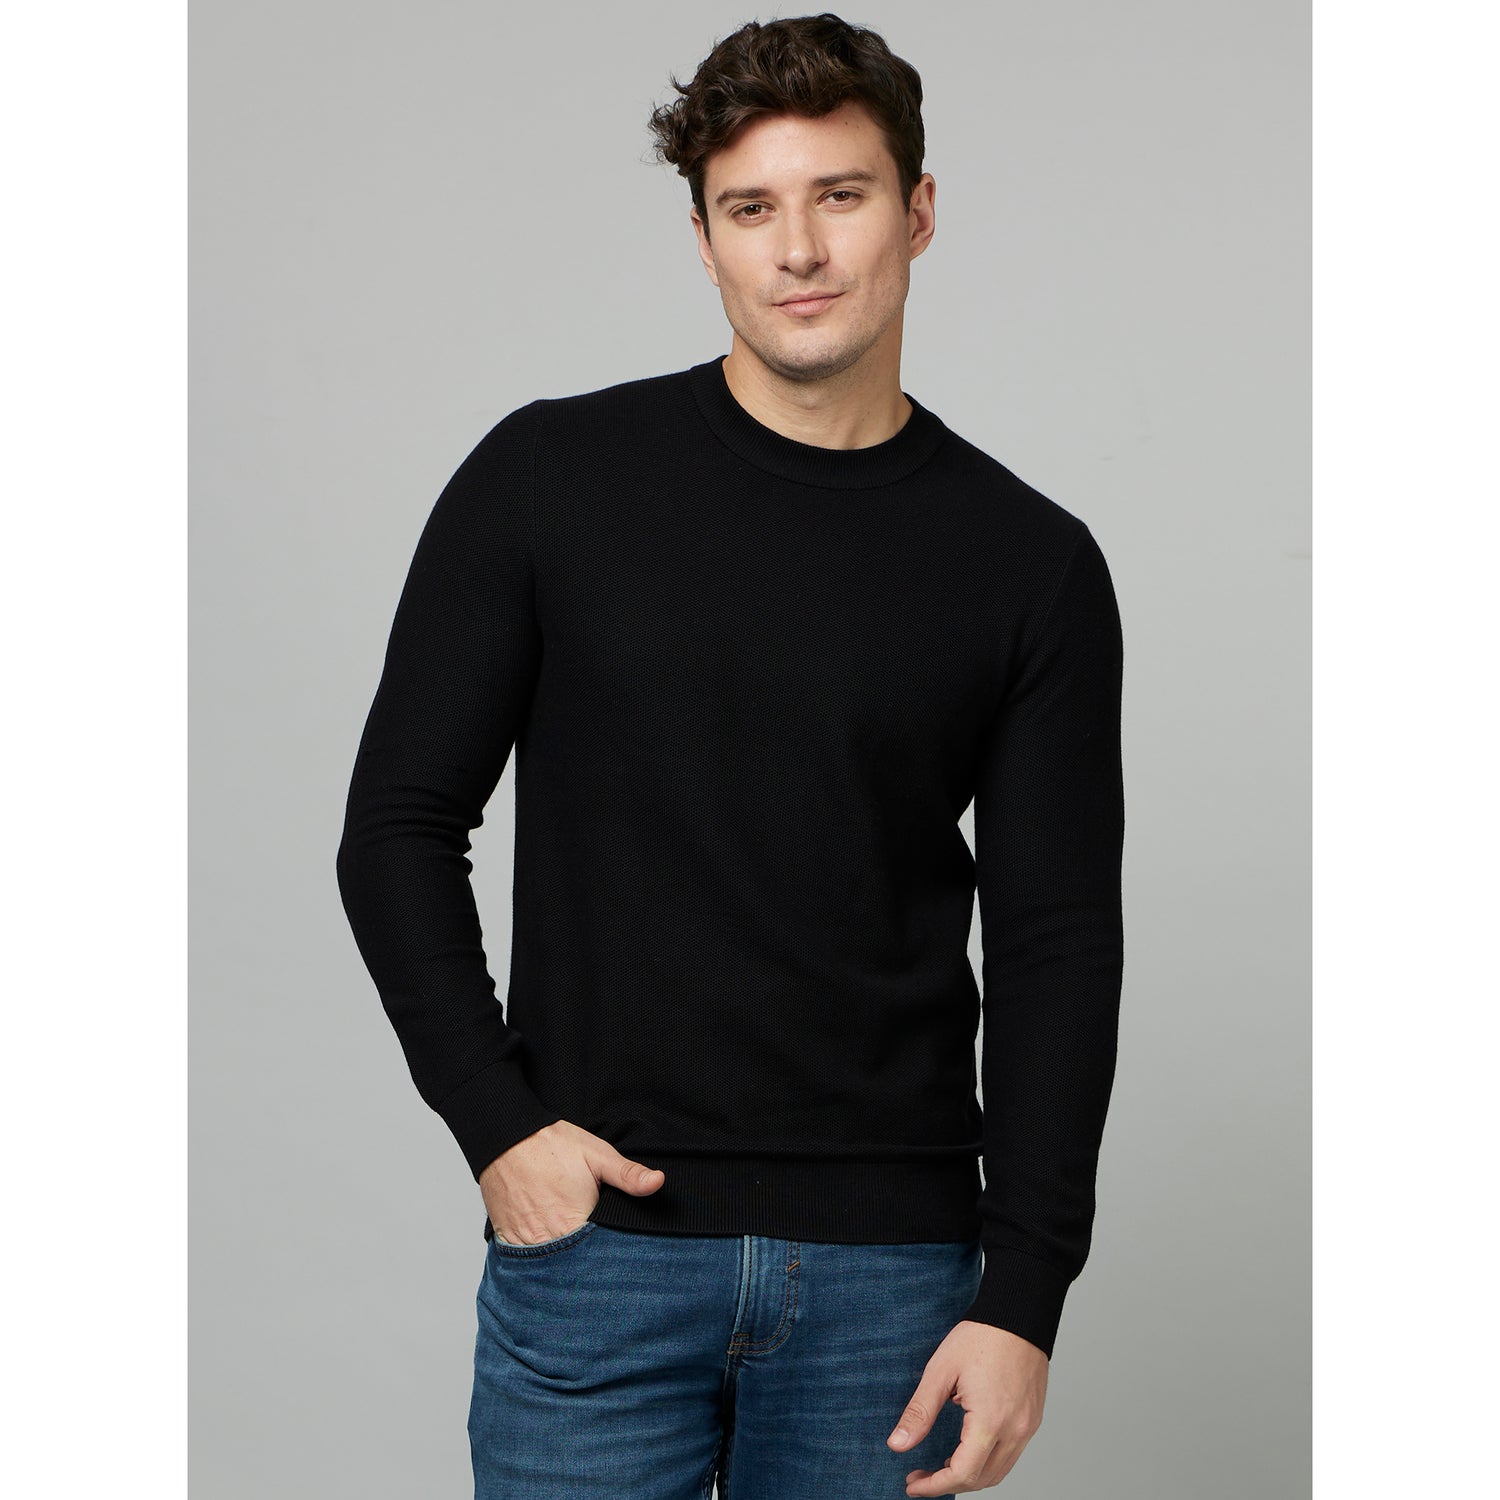 Black Round Neck Long Sleeve Cotton Pullover Sweater (BEPICIN)